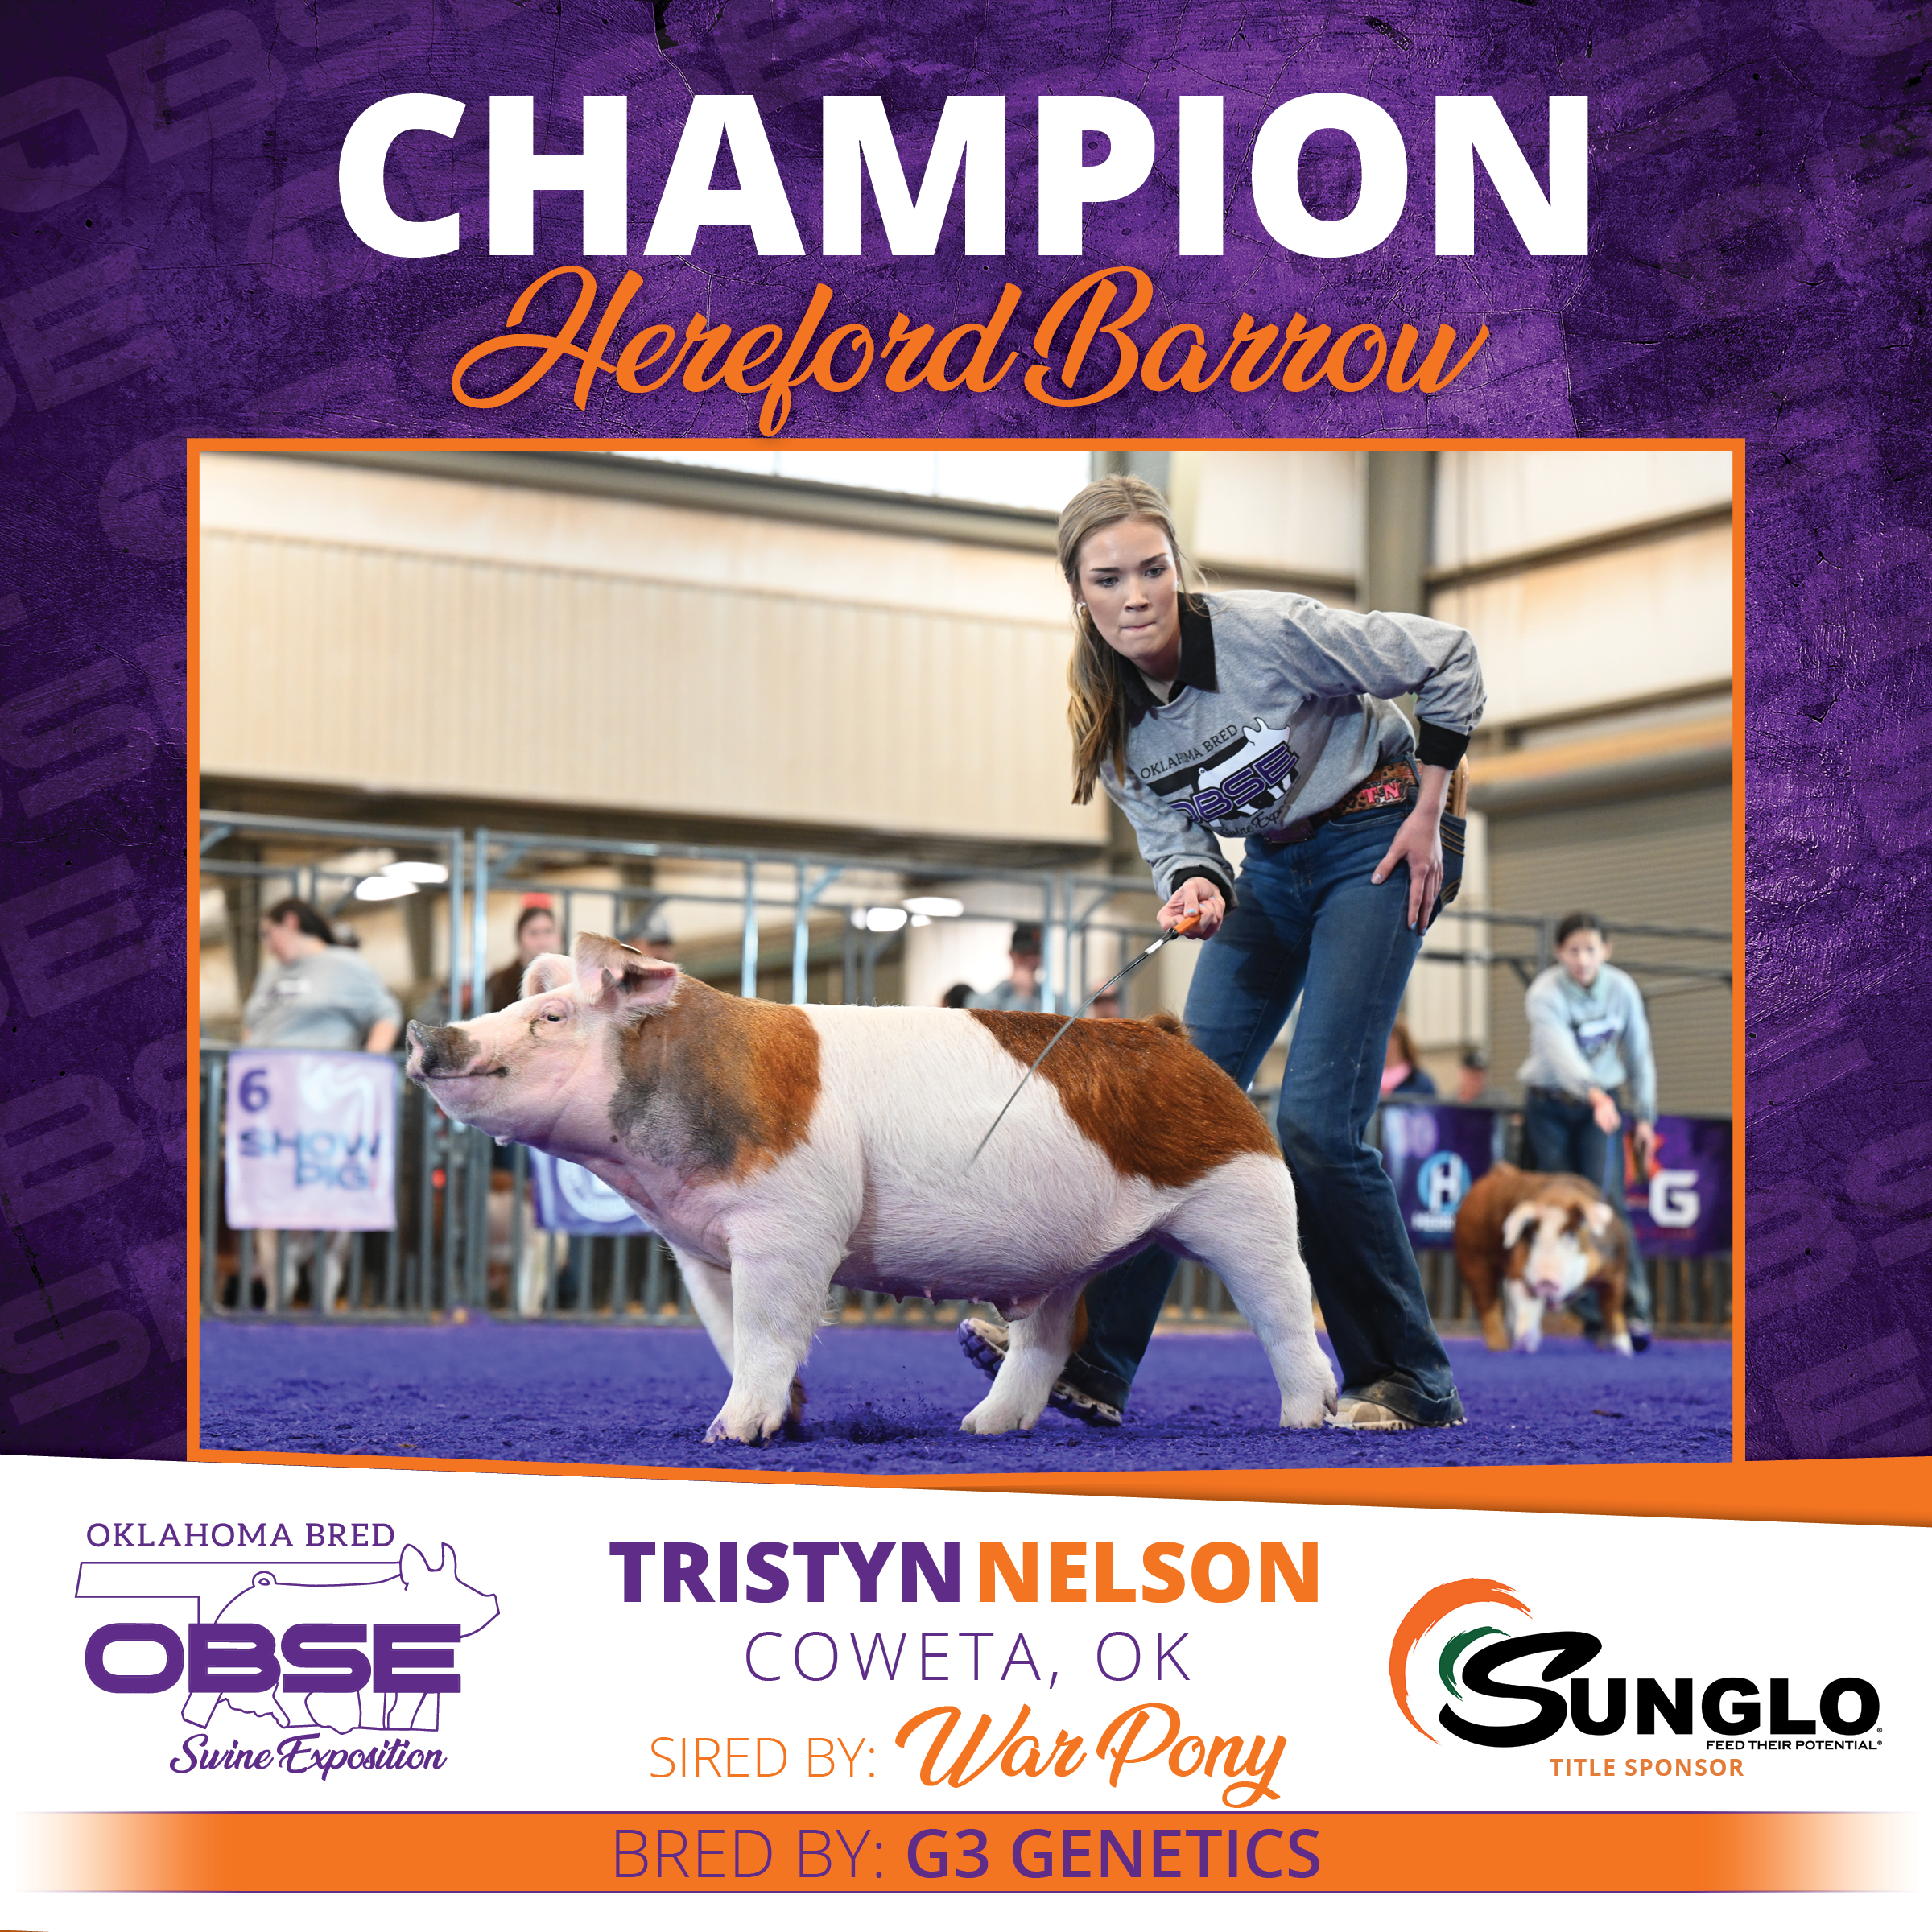 Champion Hereford Barrow.png